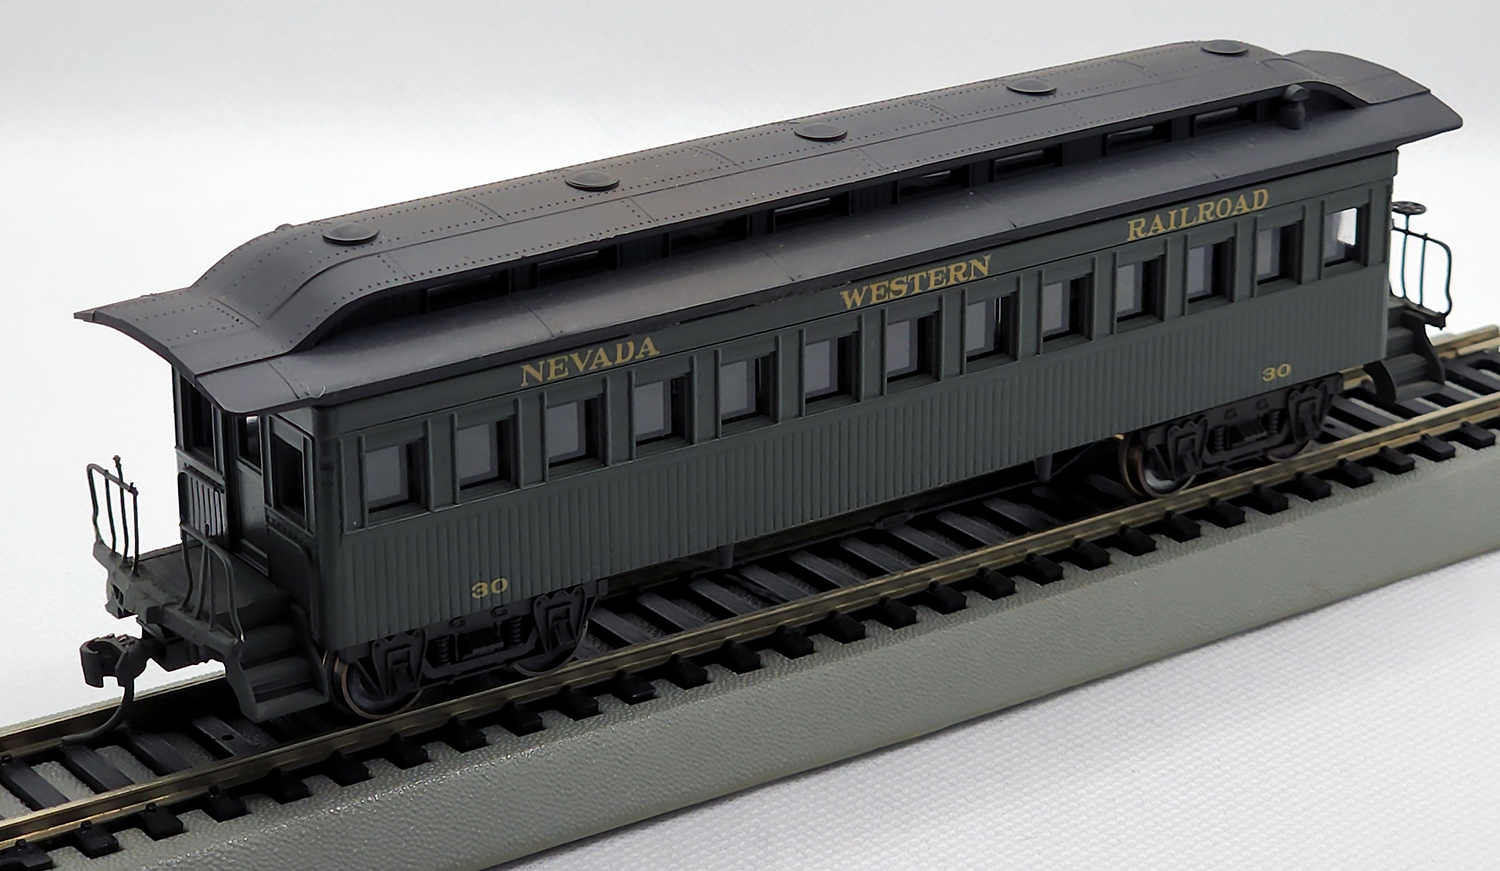 4th view of the Unbranded Nevada Western Railroad Passenger Coach #30 in my HO-scale Collection